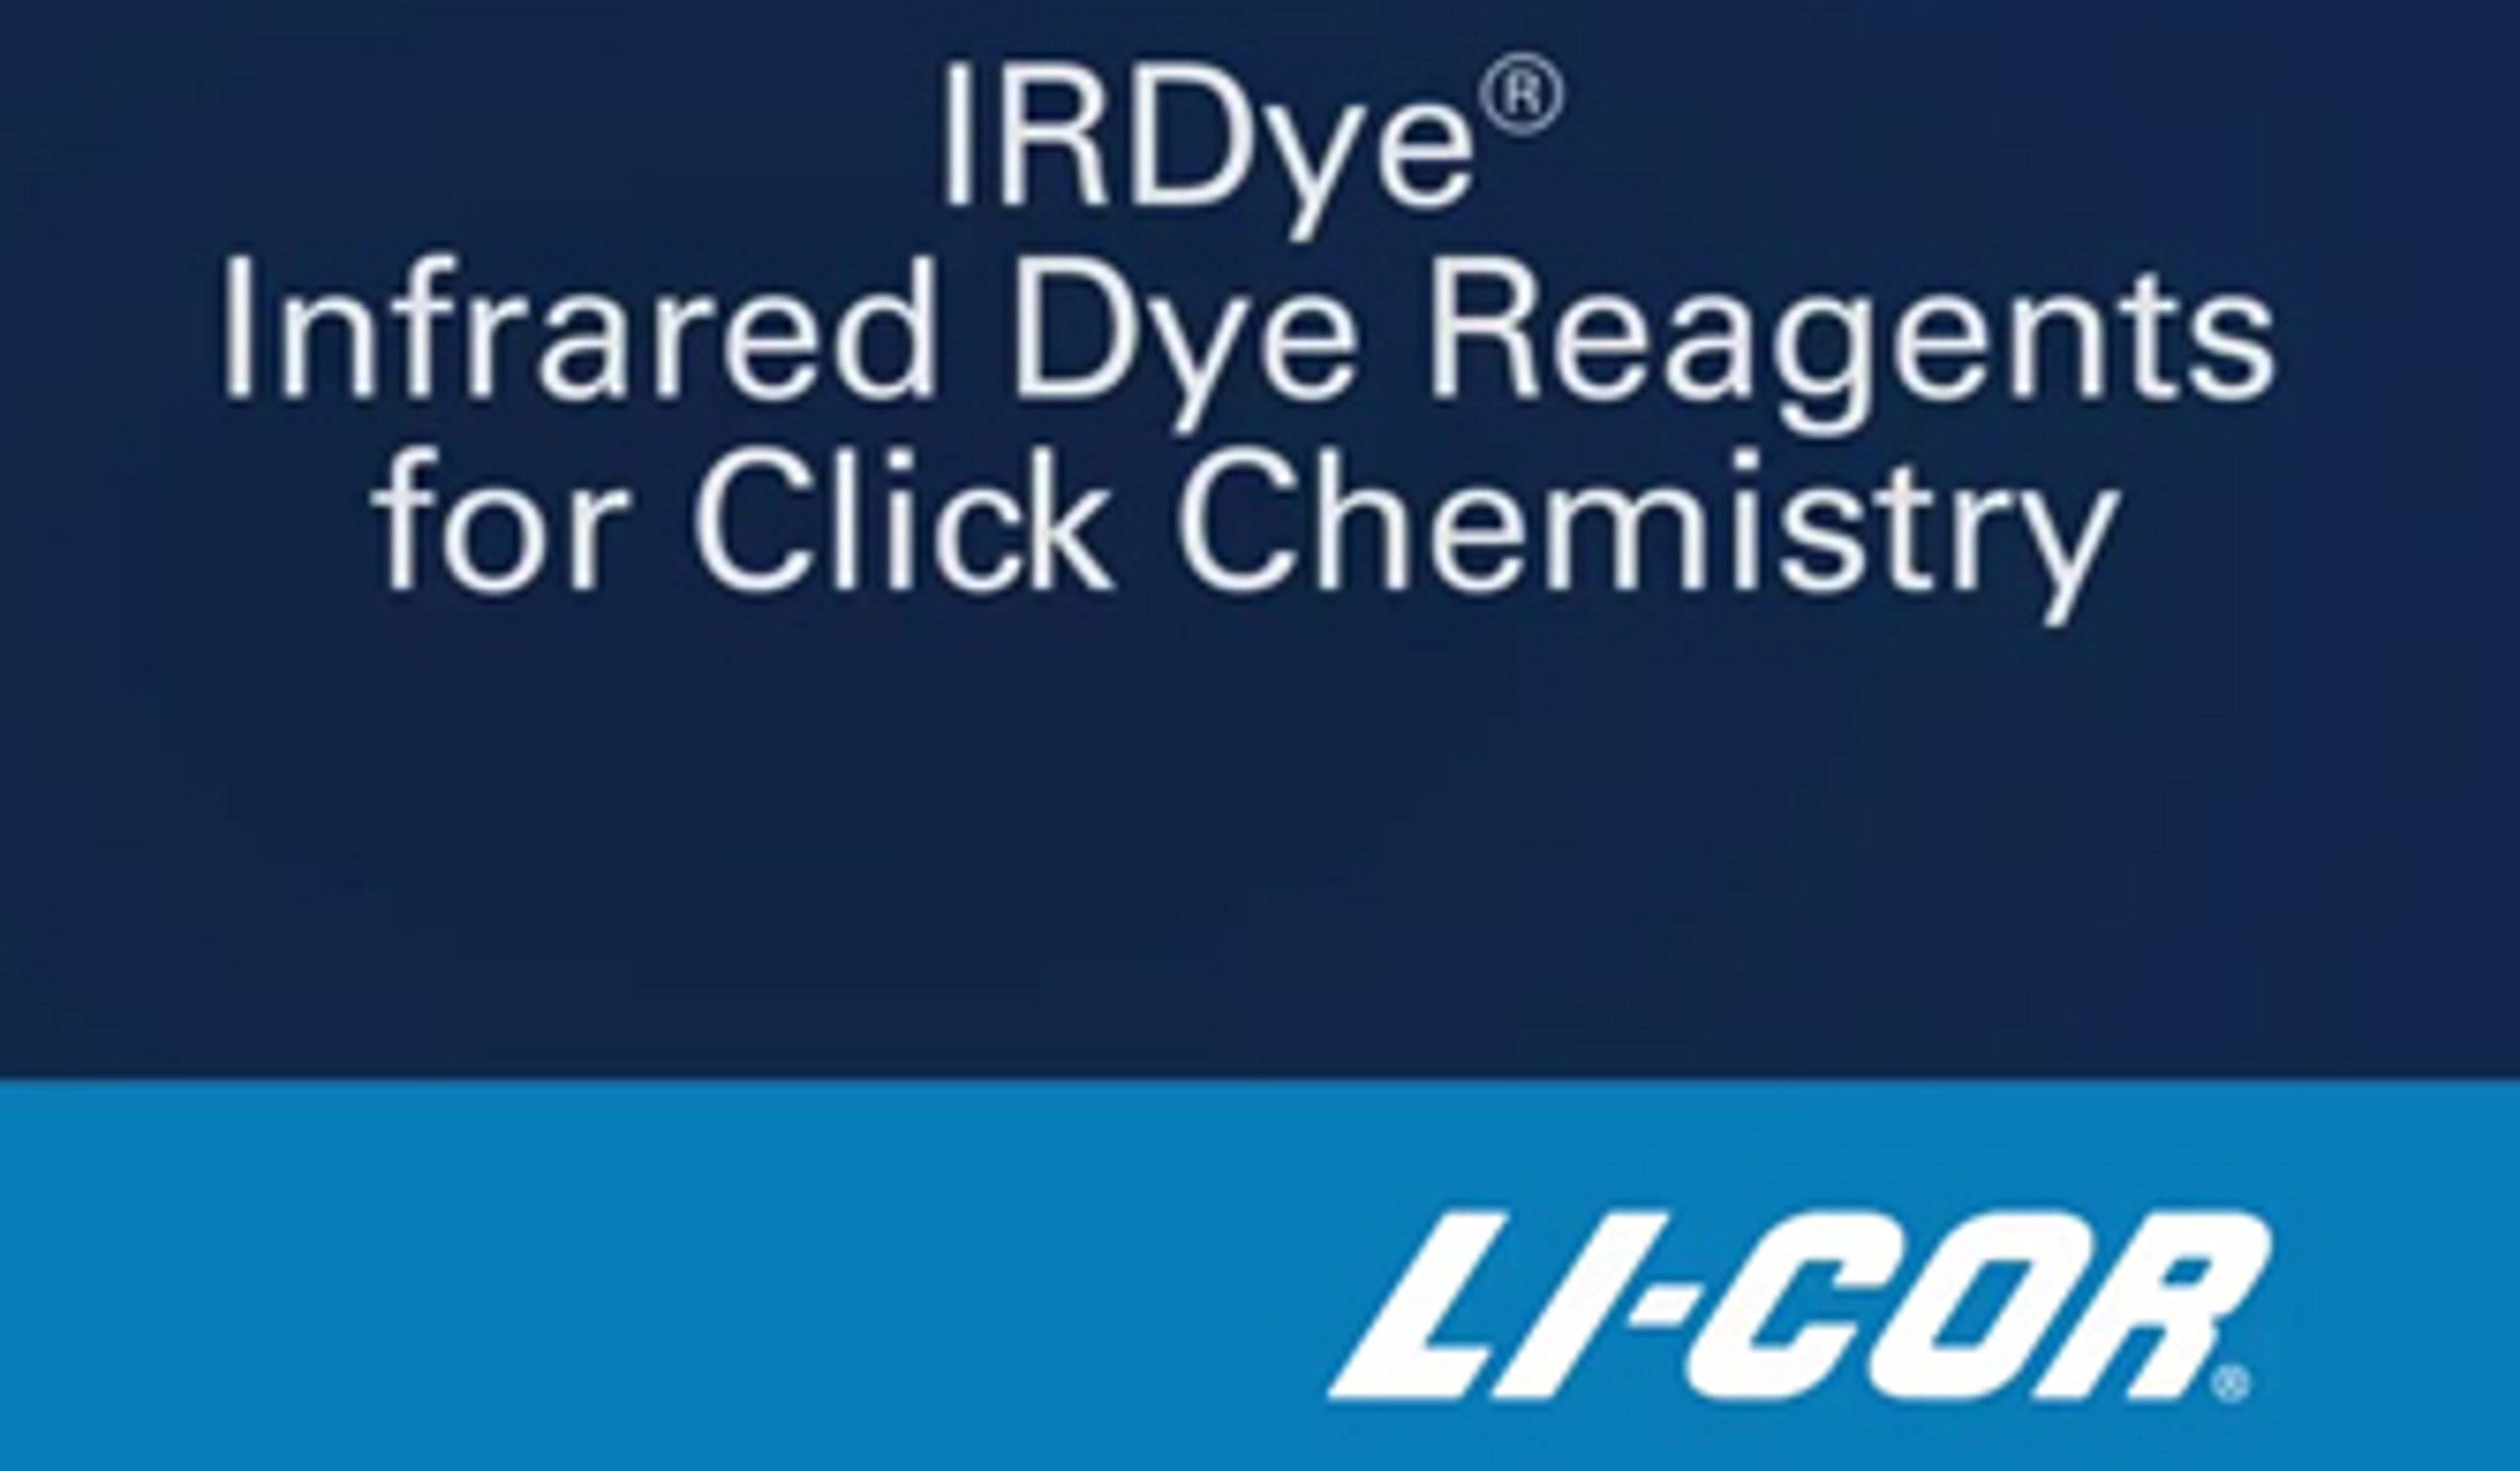 IRDye®- Infrared Dye Reagents for Click Chemistry